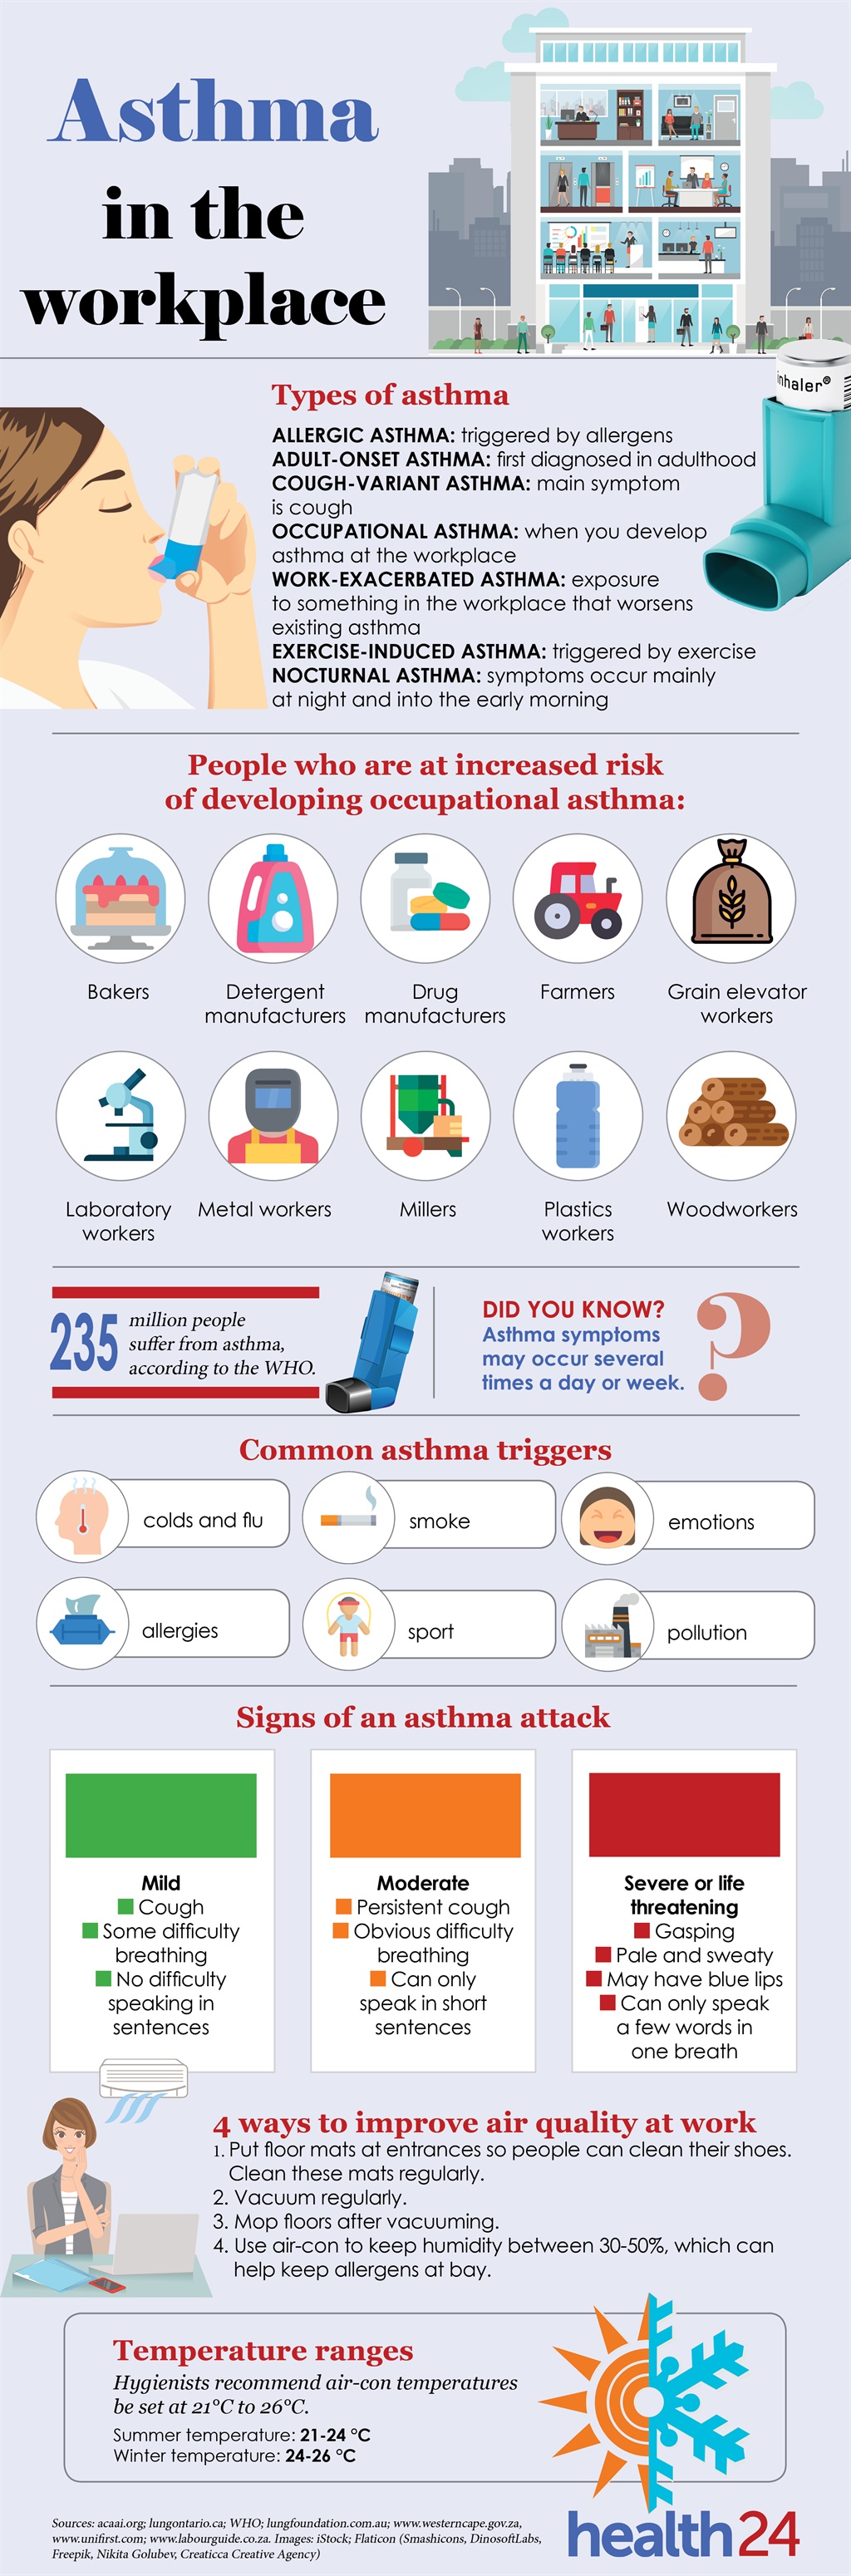 Asthma in the workplace infographic